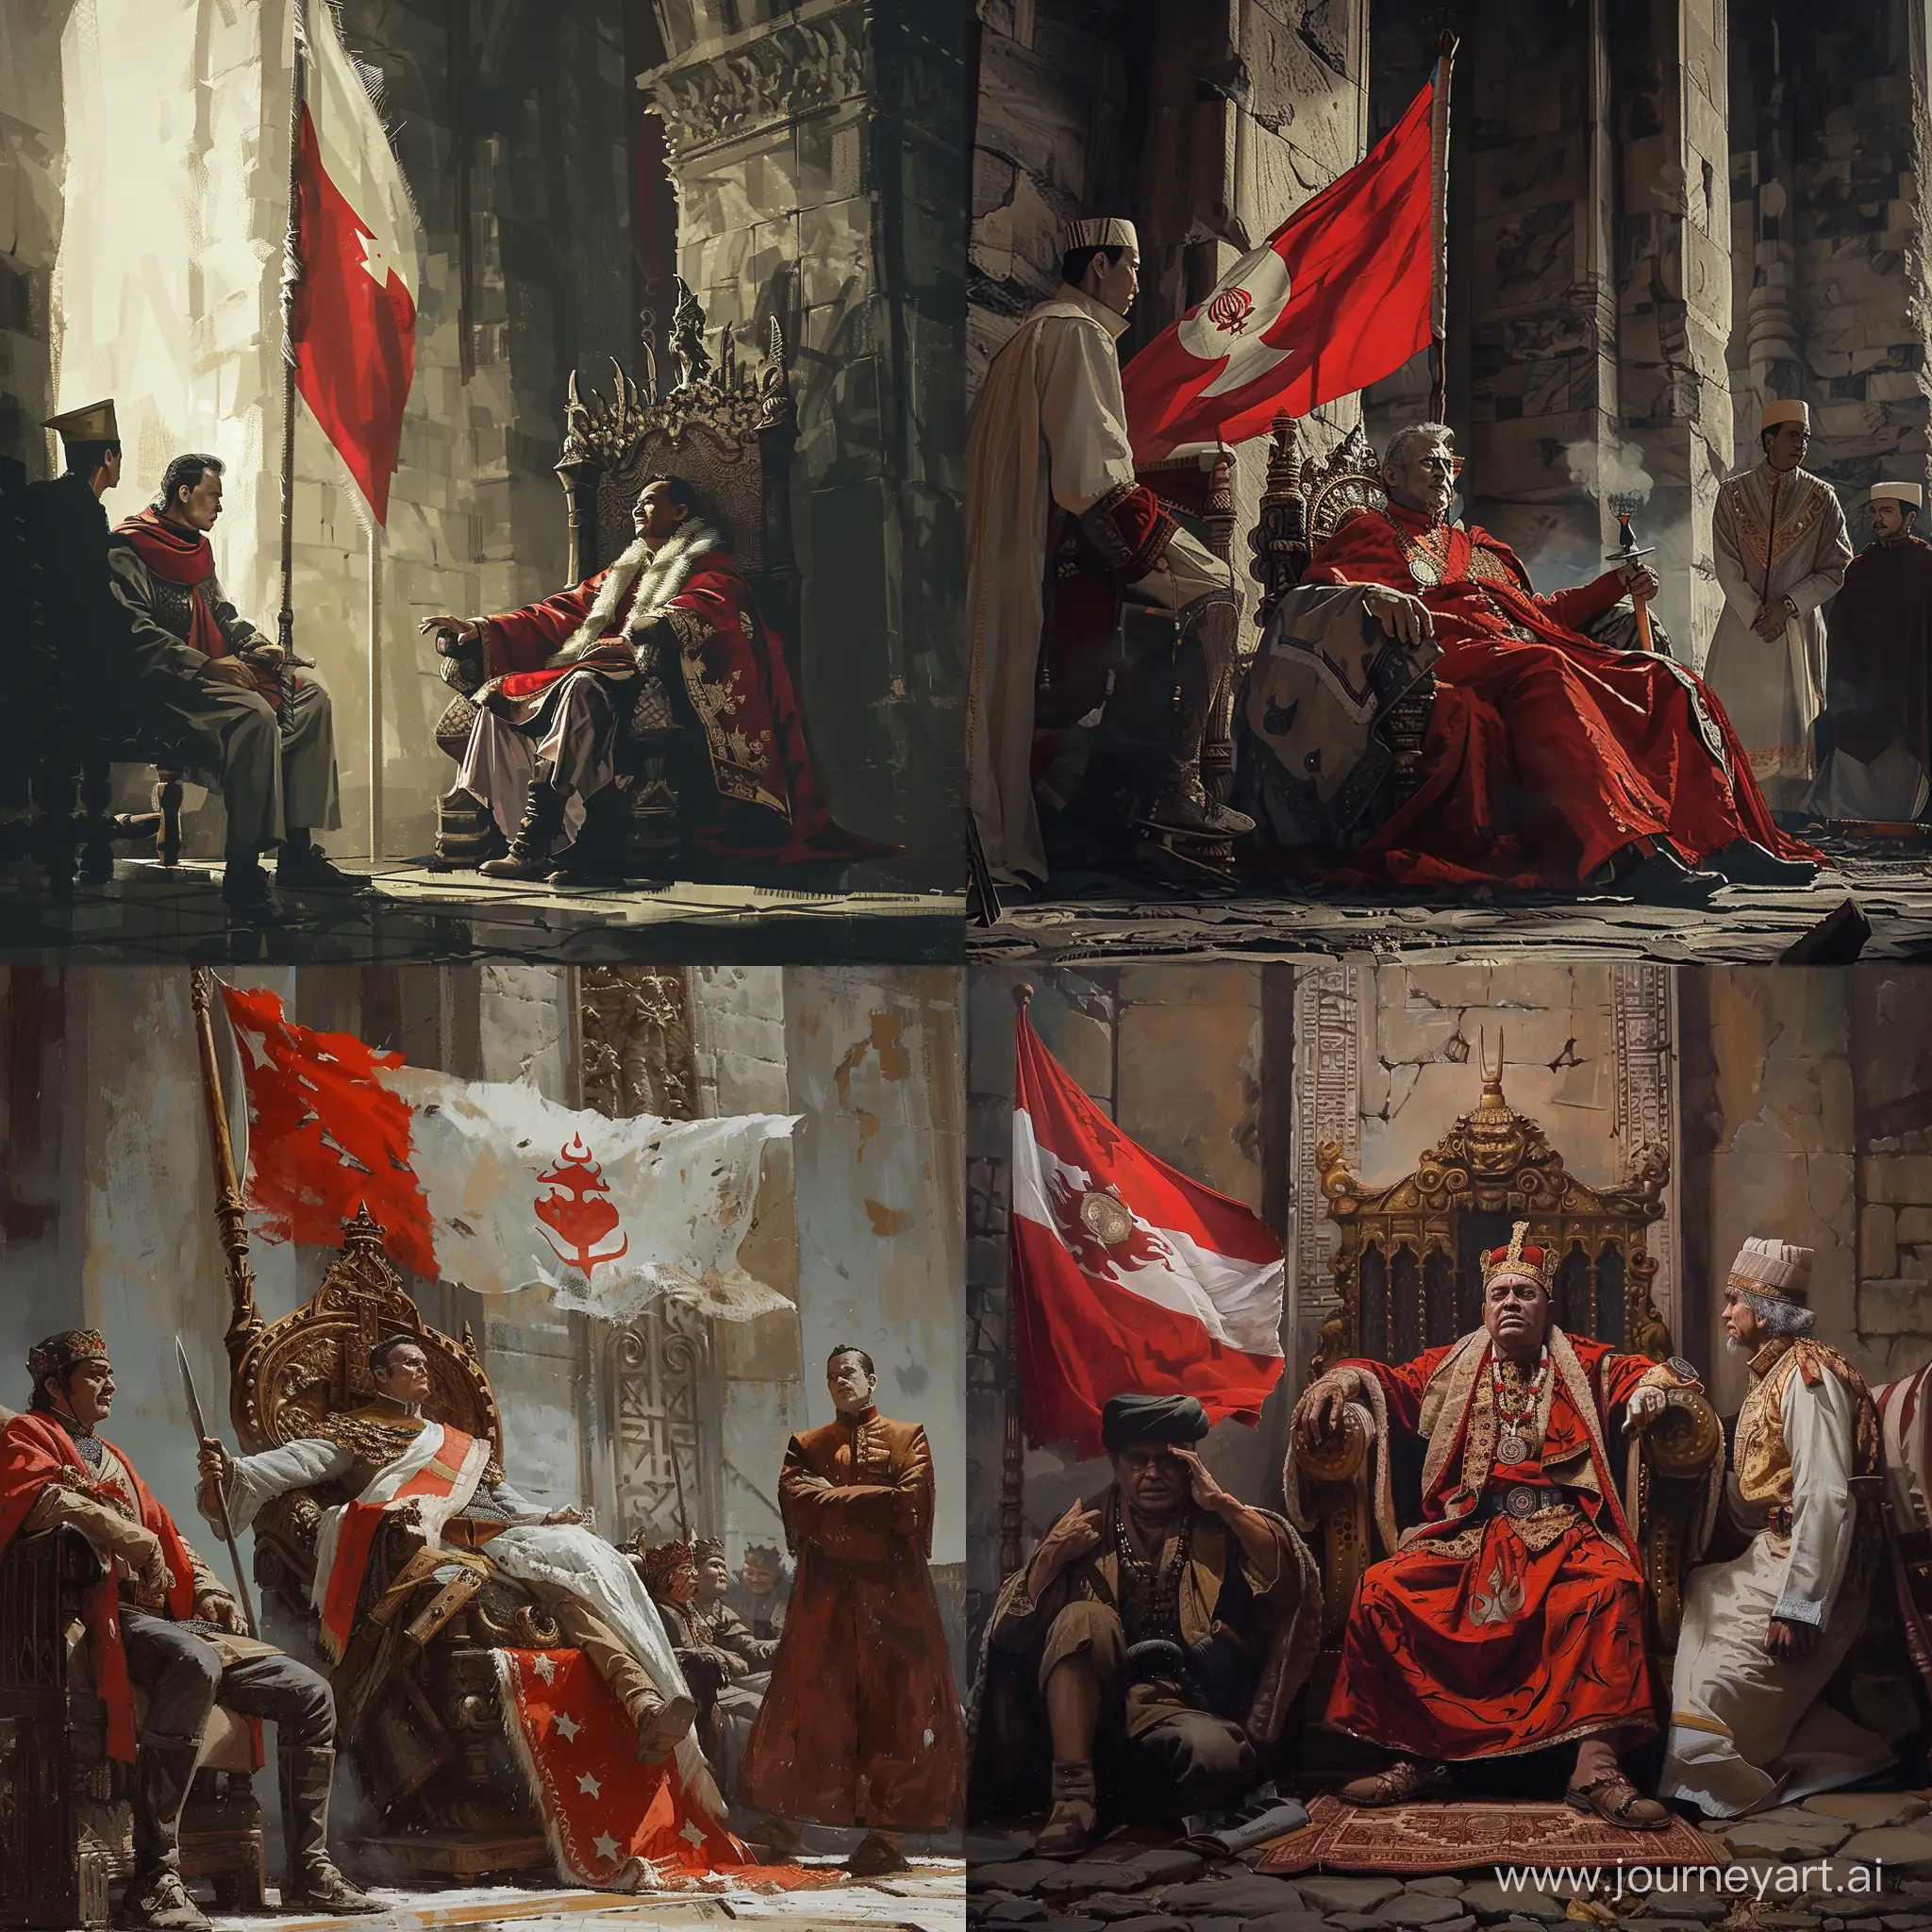 Medieval-King-Prabowo-and-Counselor-Gibran-with-Indonesian-Flag